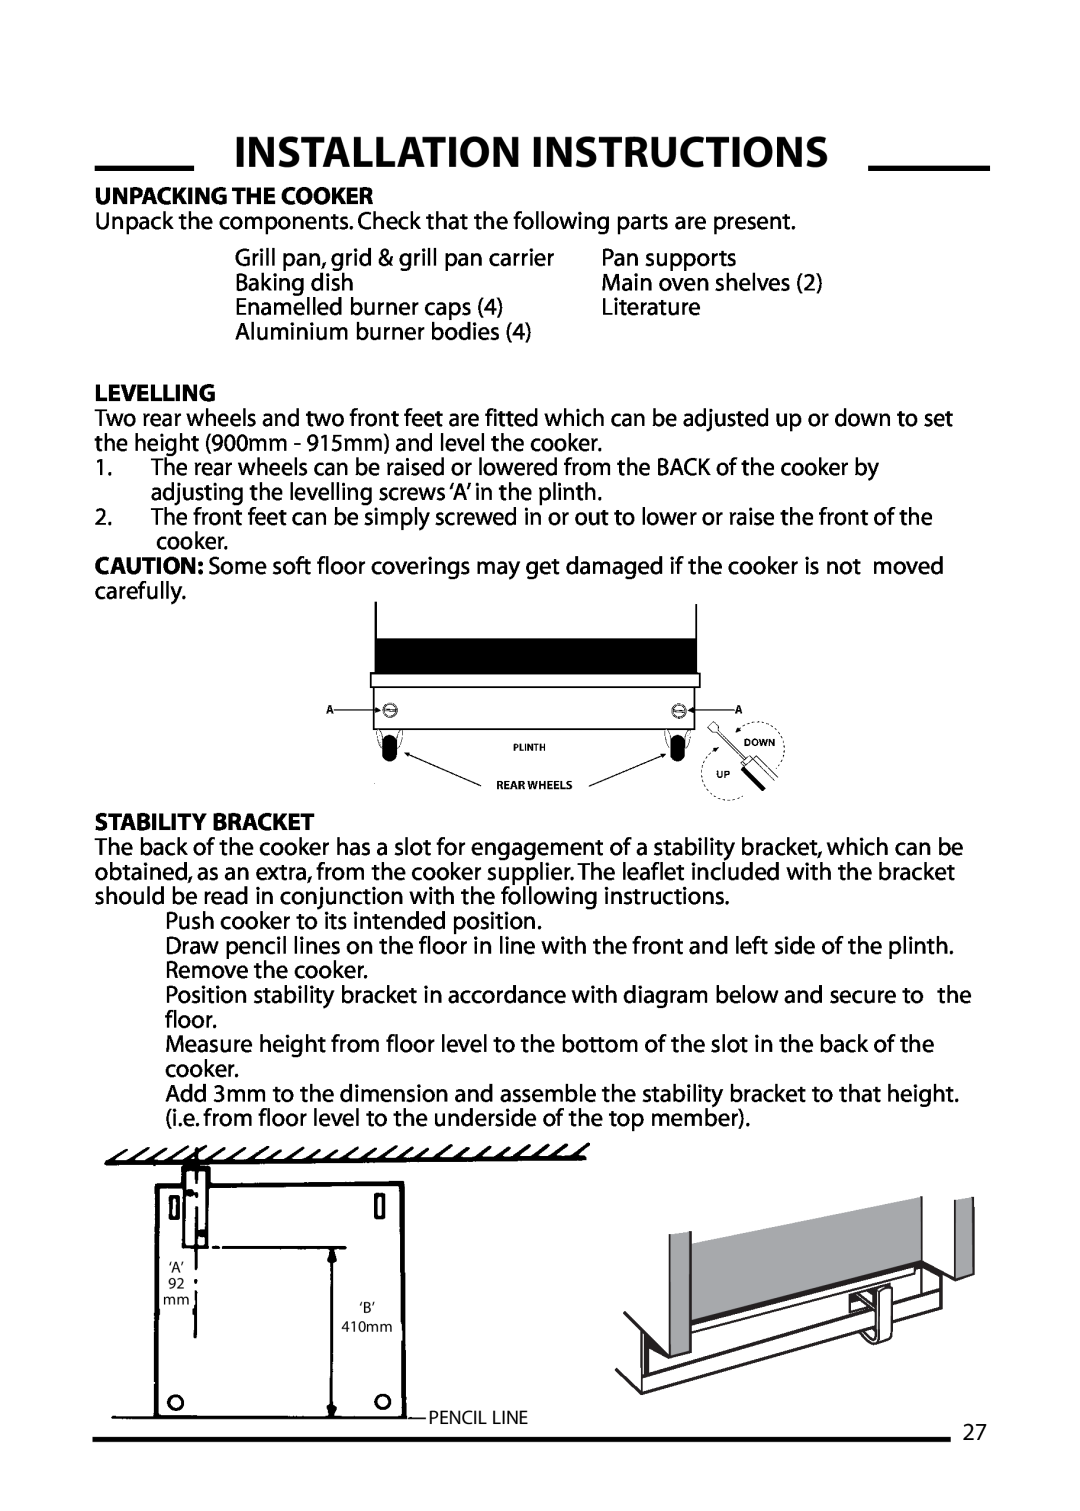 Cannon 10556G, 10555G, 10550G, 10552G Unpacking The Cooker, Levelling, Stability Bracket, Installation Instructions 